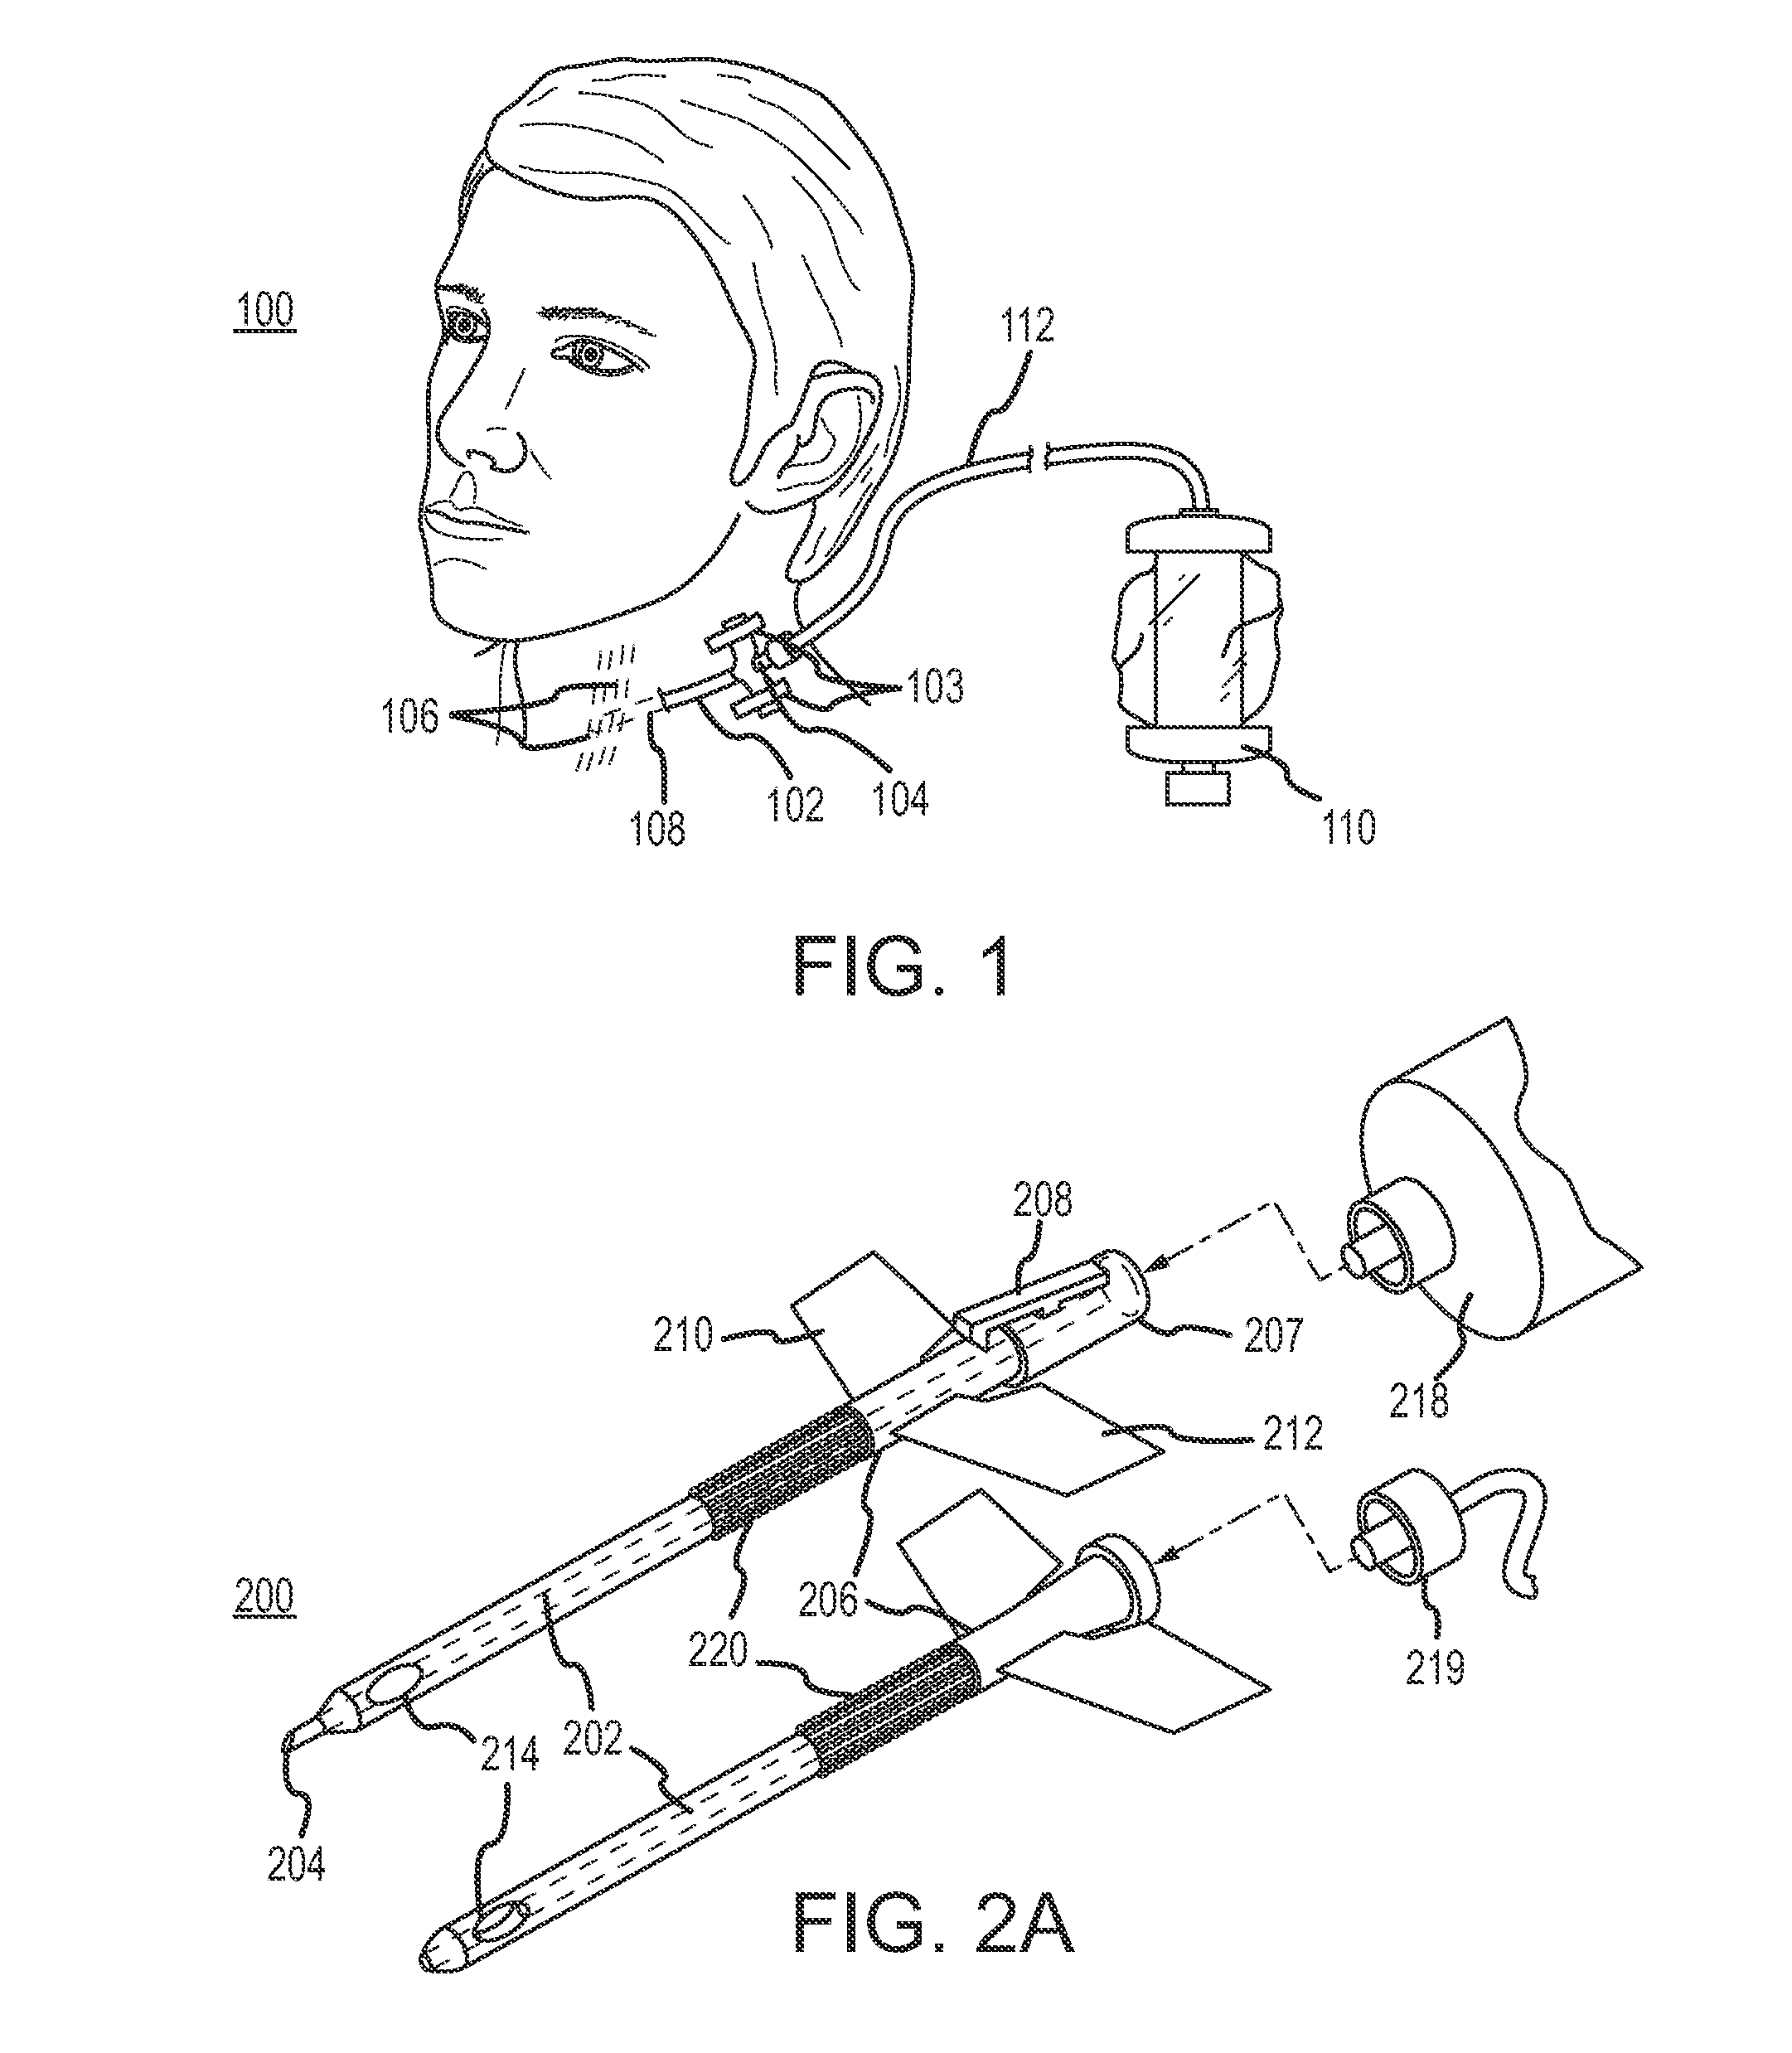 Continuous anesthesia nerve conduction apparatus and method